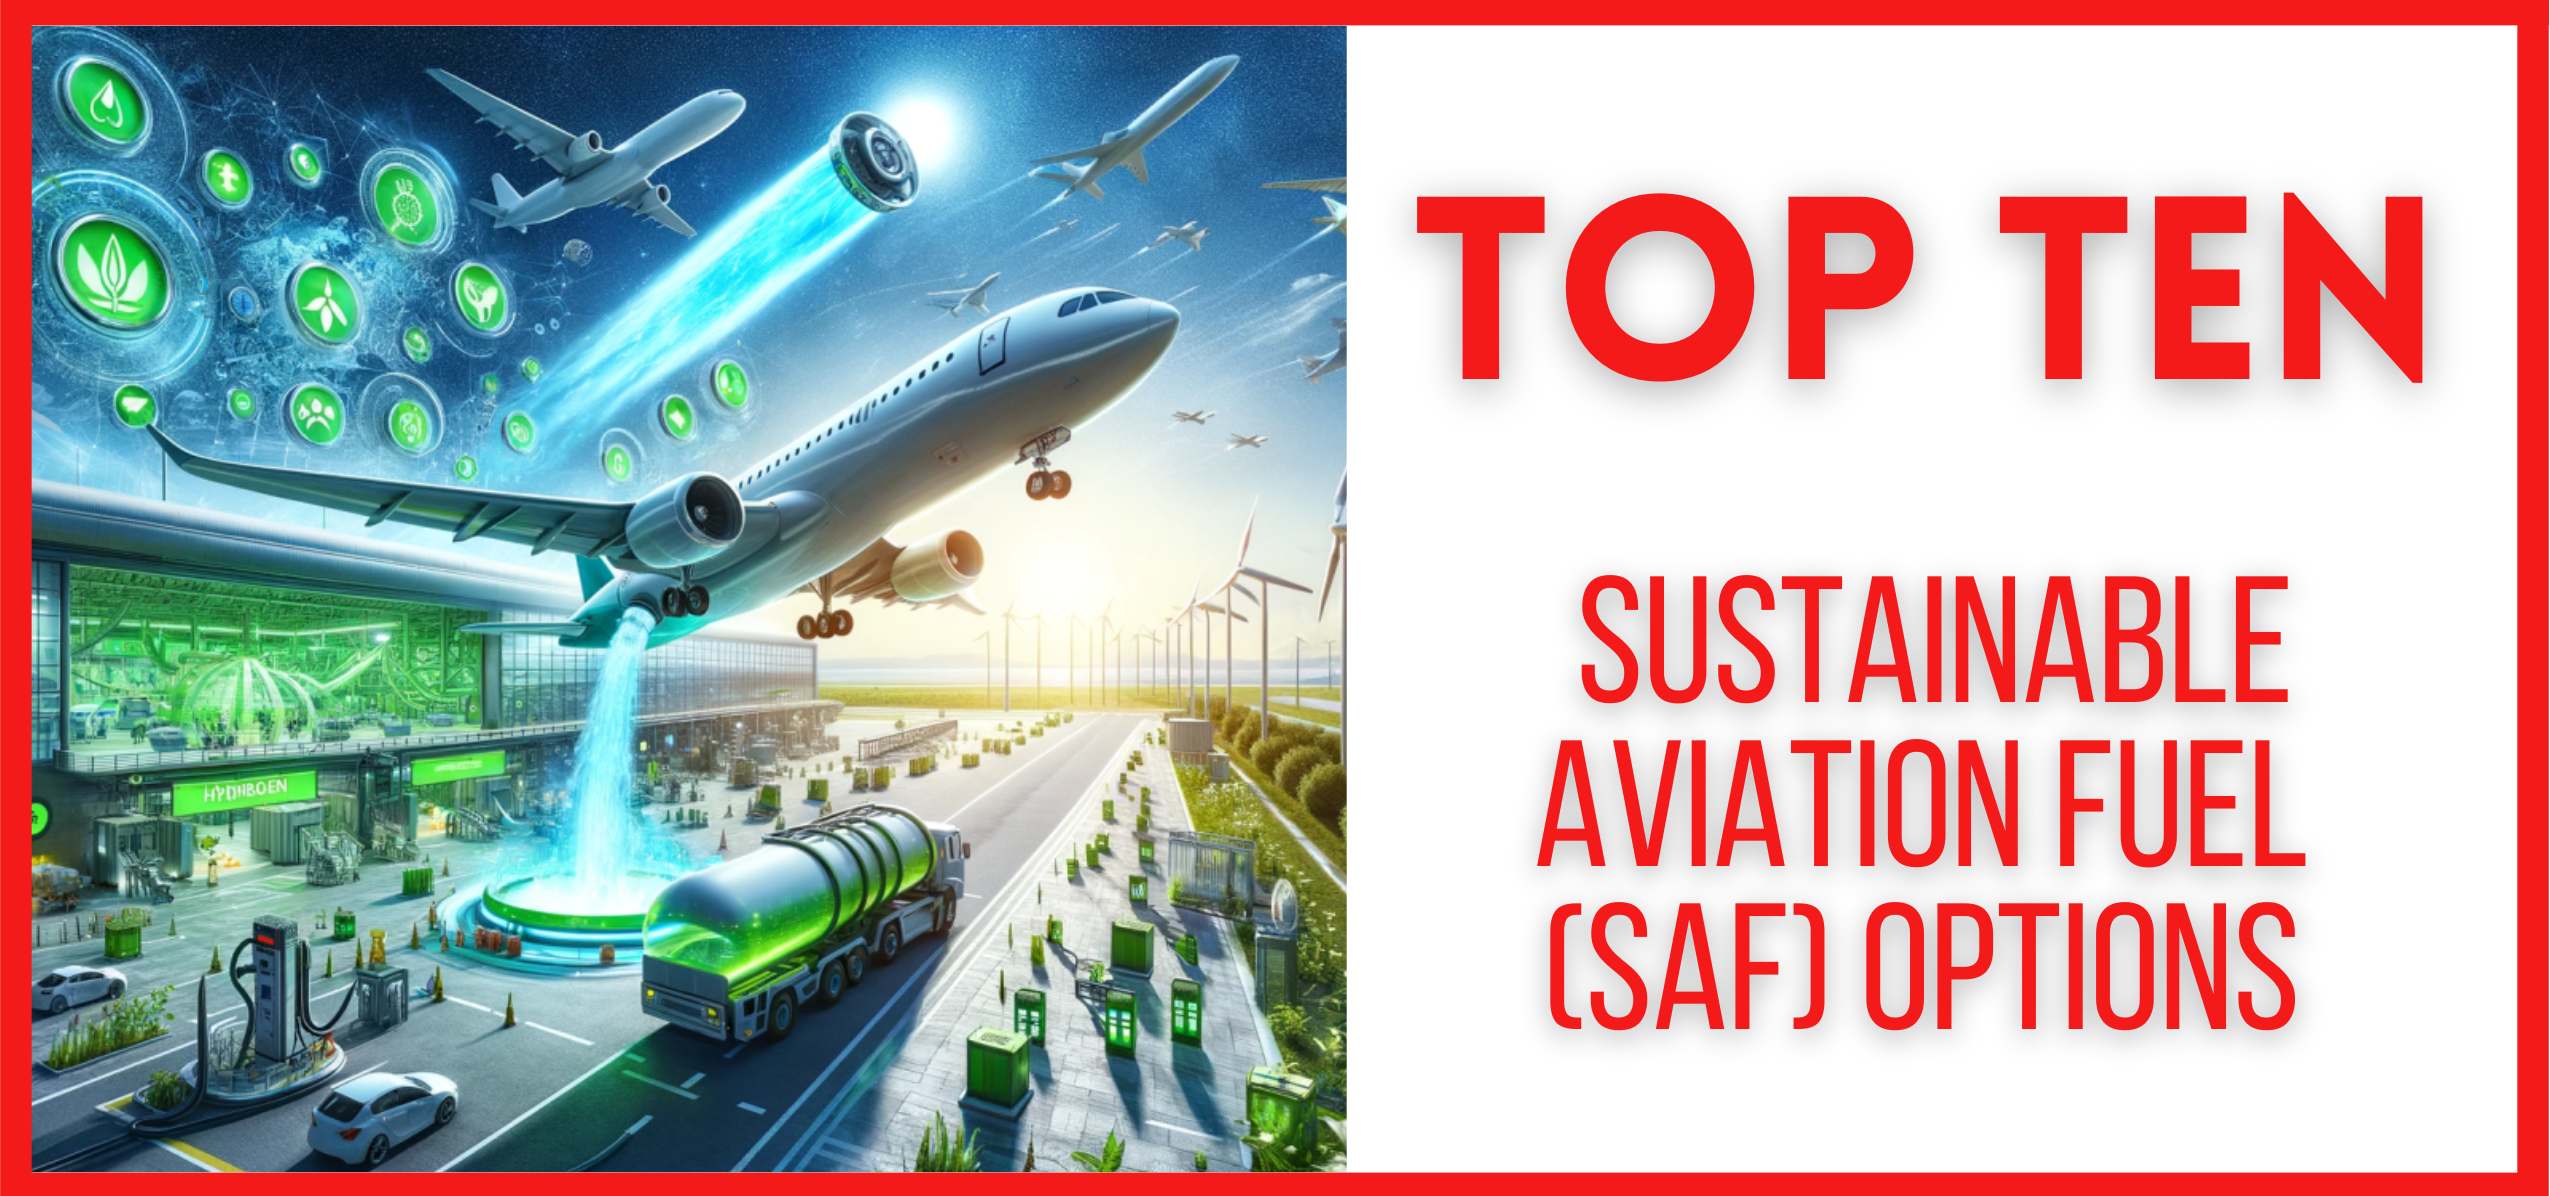 showing the image of Sustainable Aviation Fuel (SAF)